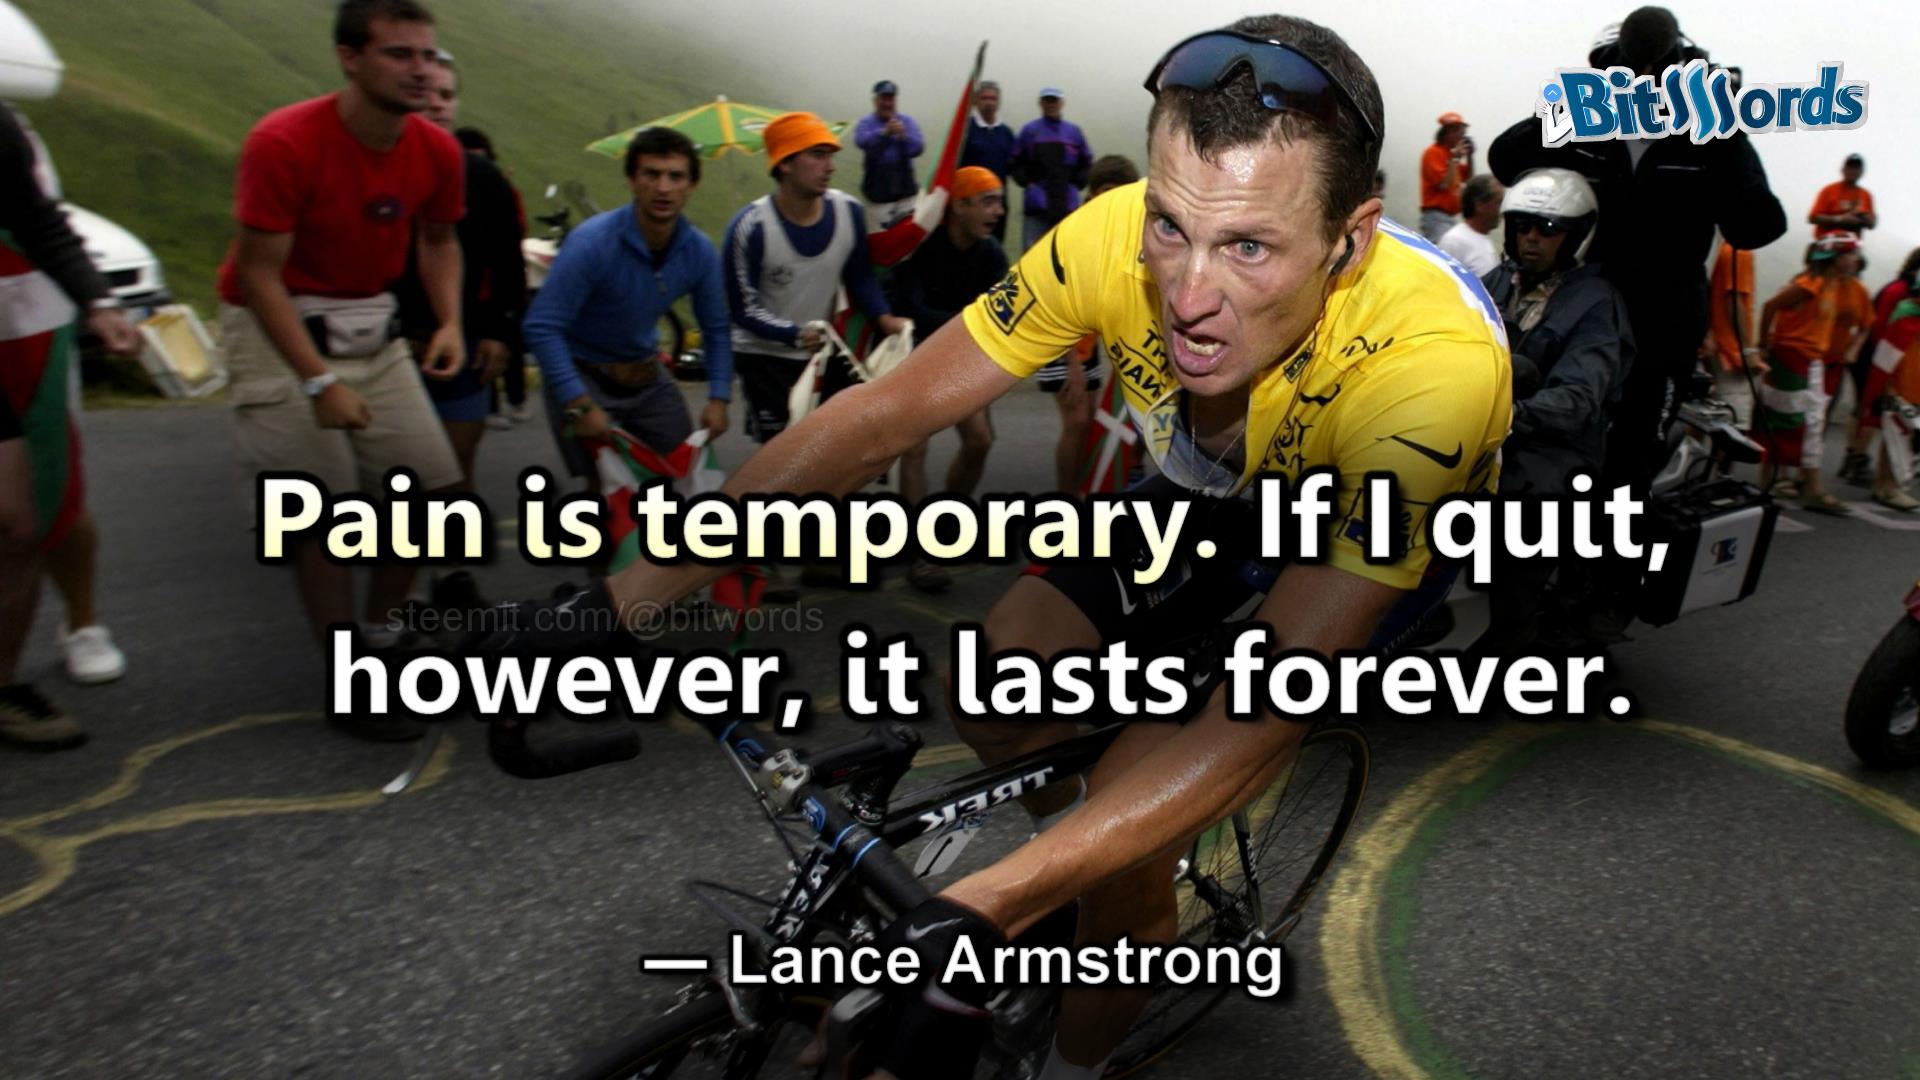 bit words sportquote of the day lance armstrong pain is temporary quitting last foreever.jpg